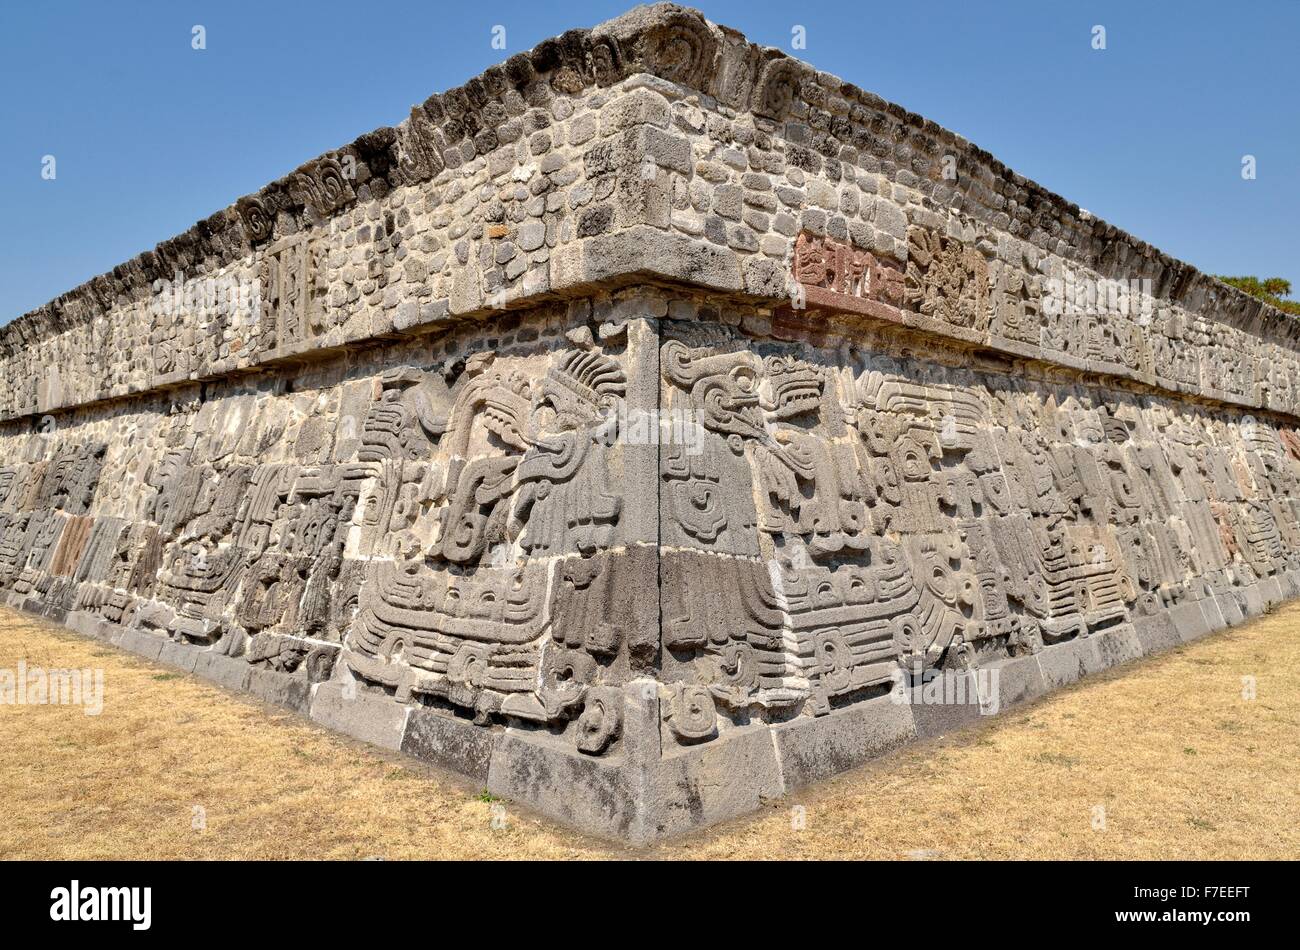 Pyramid of the Feathered Serpents, Ruins of Xochicalco, Cuernavaca, Morelos, Mexico Stock Photo